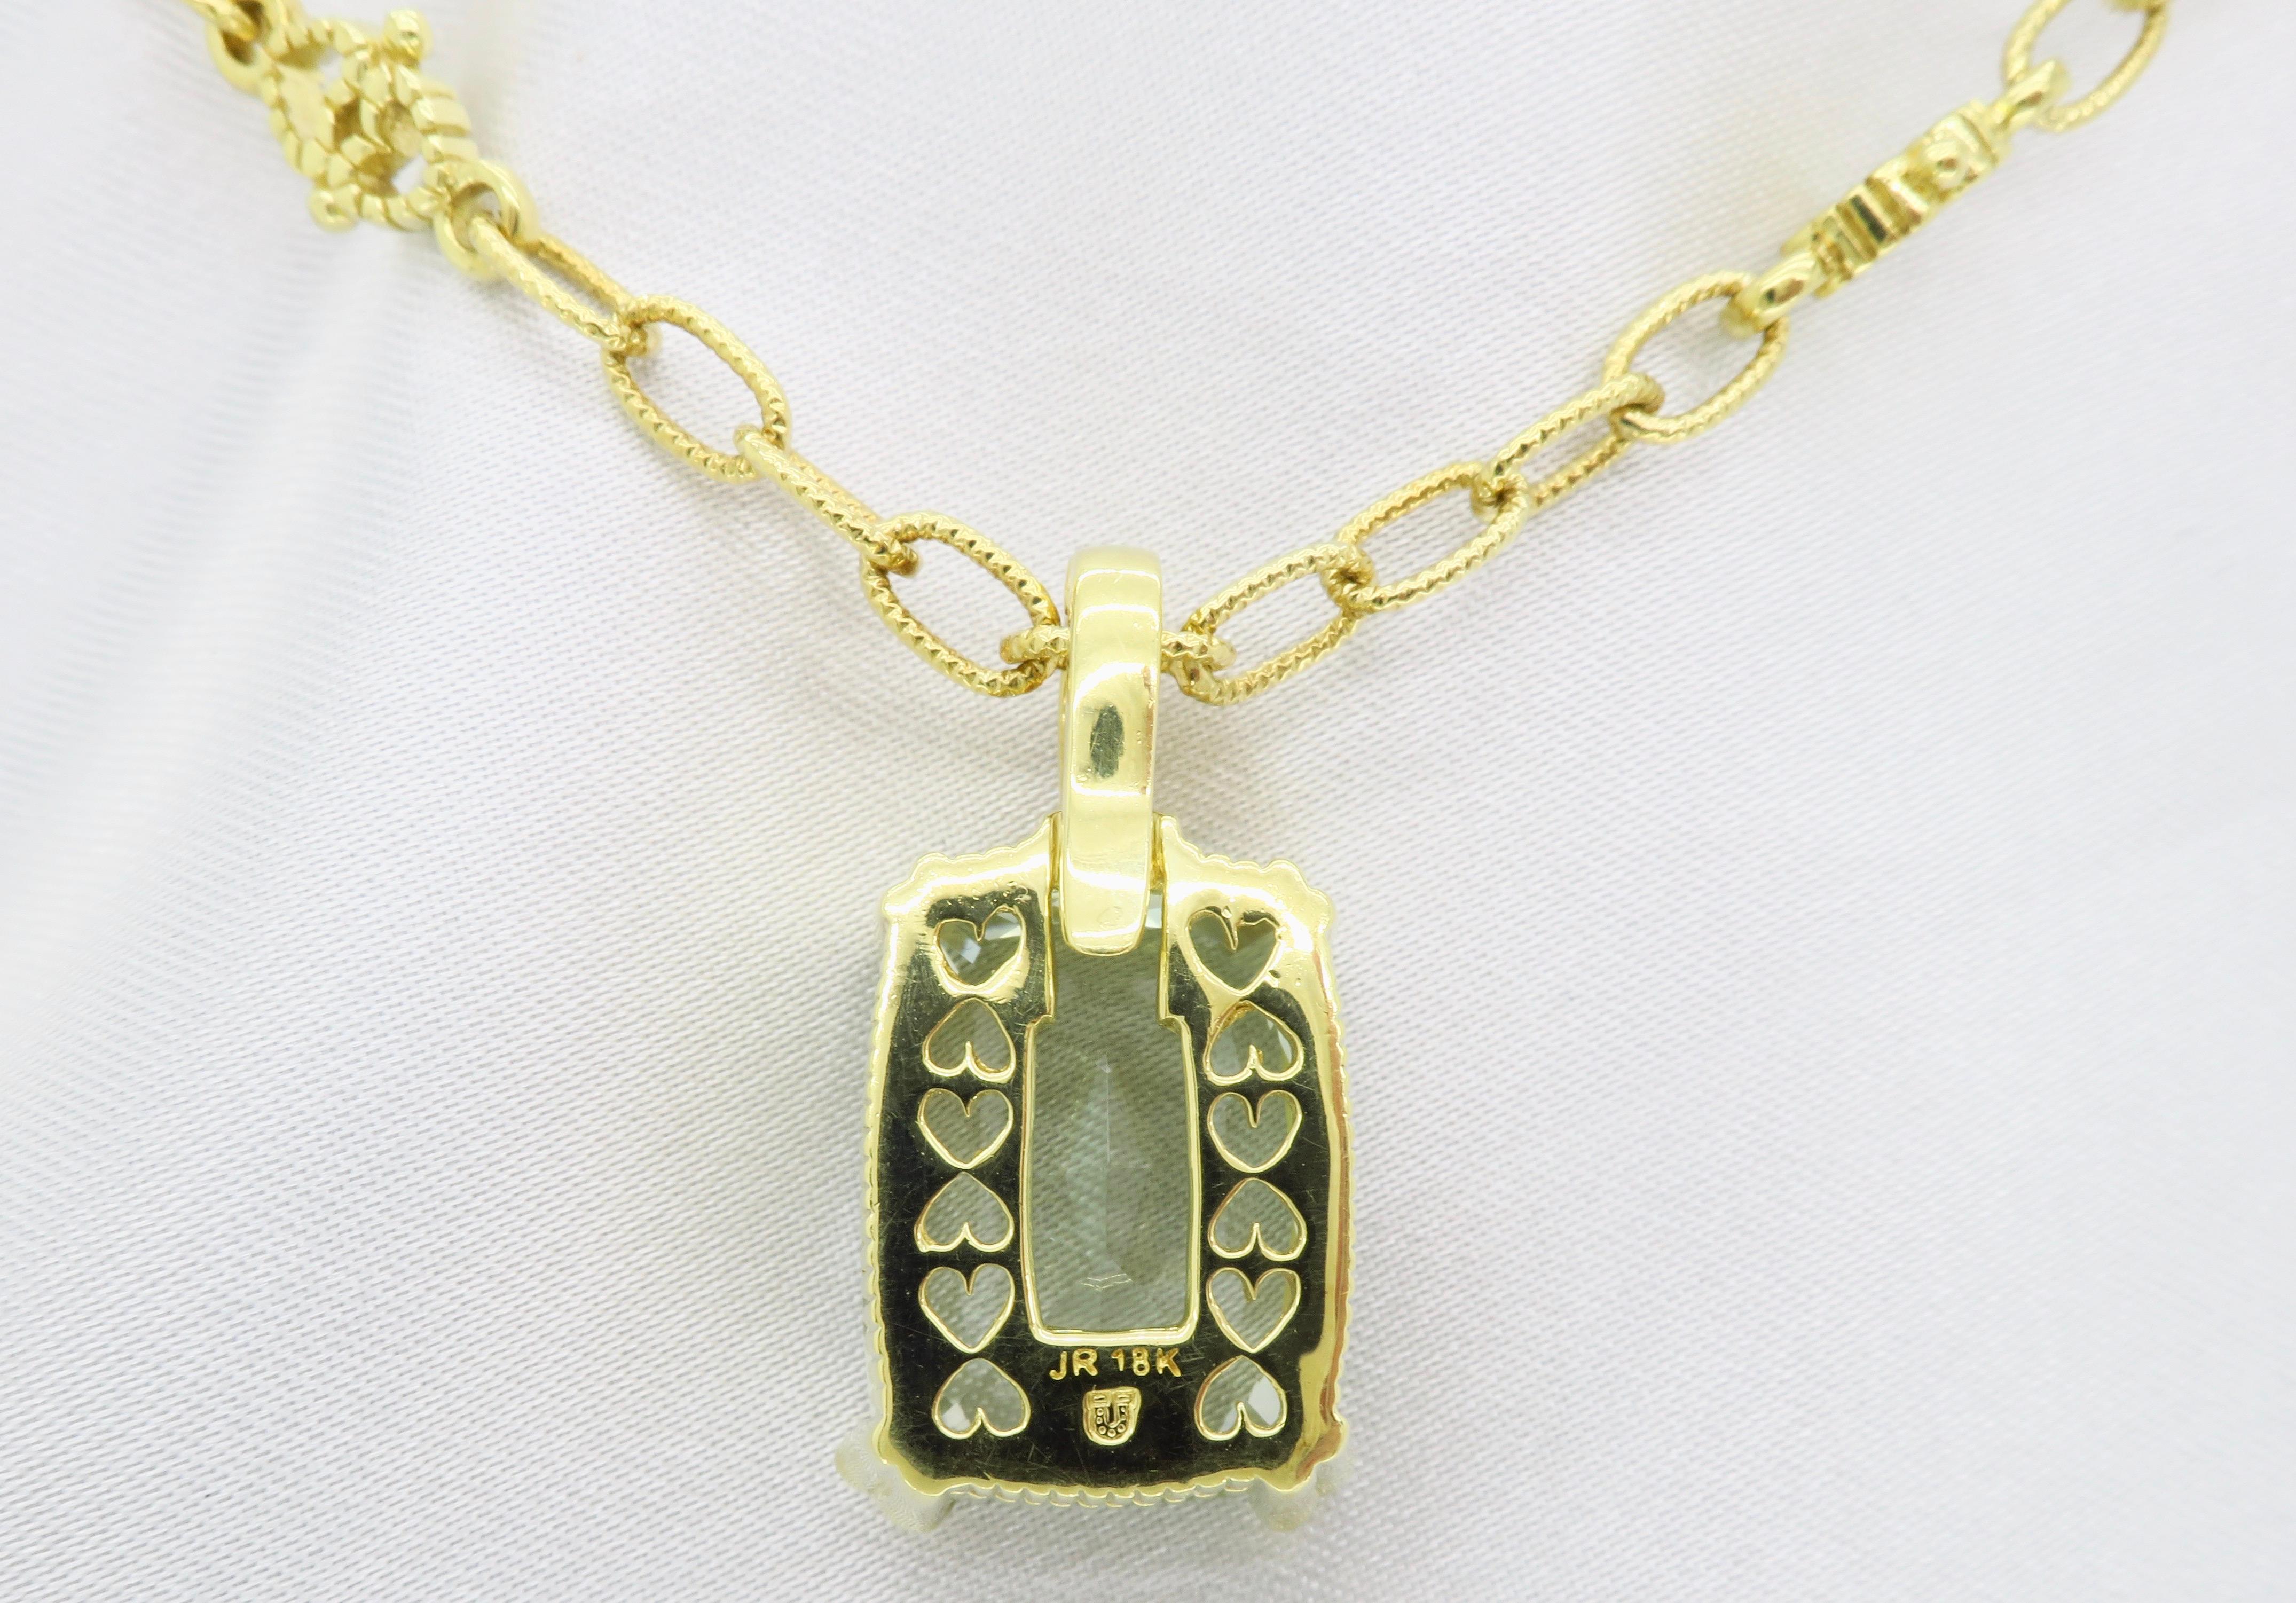 Green Amethyst and Diamond Pendant Necklace in 18 Karat Yellow Gold 5